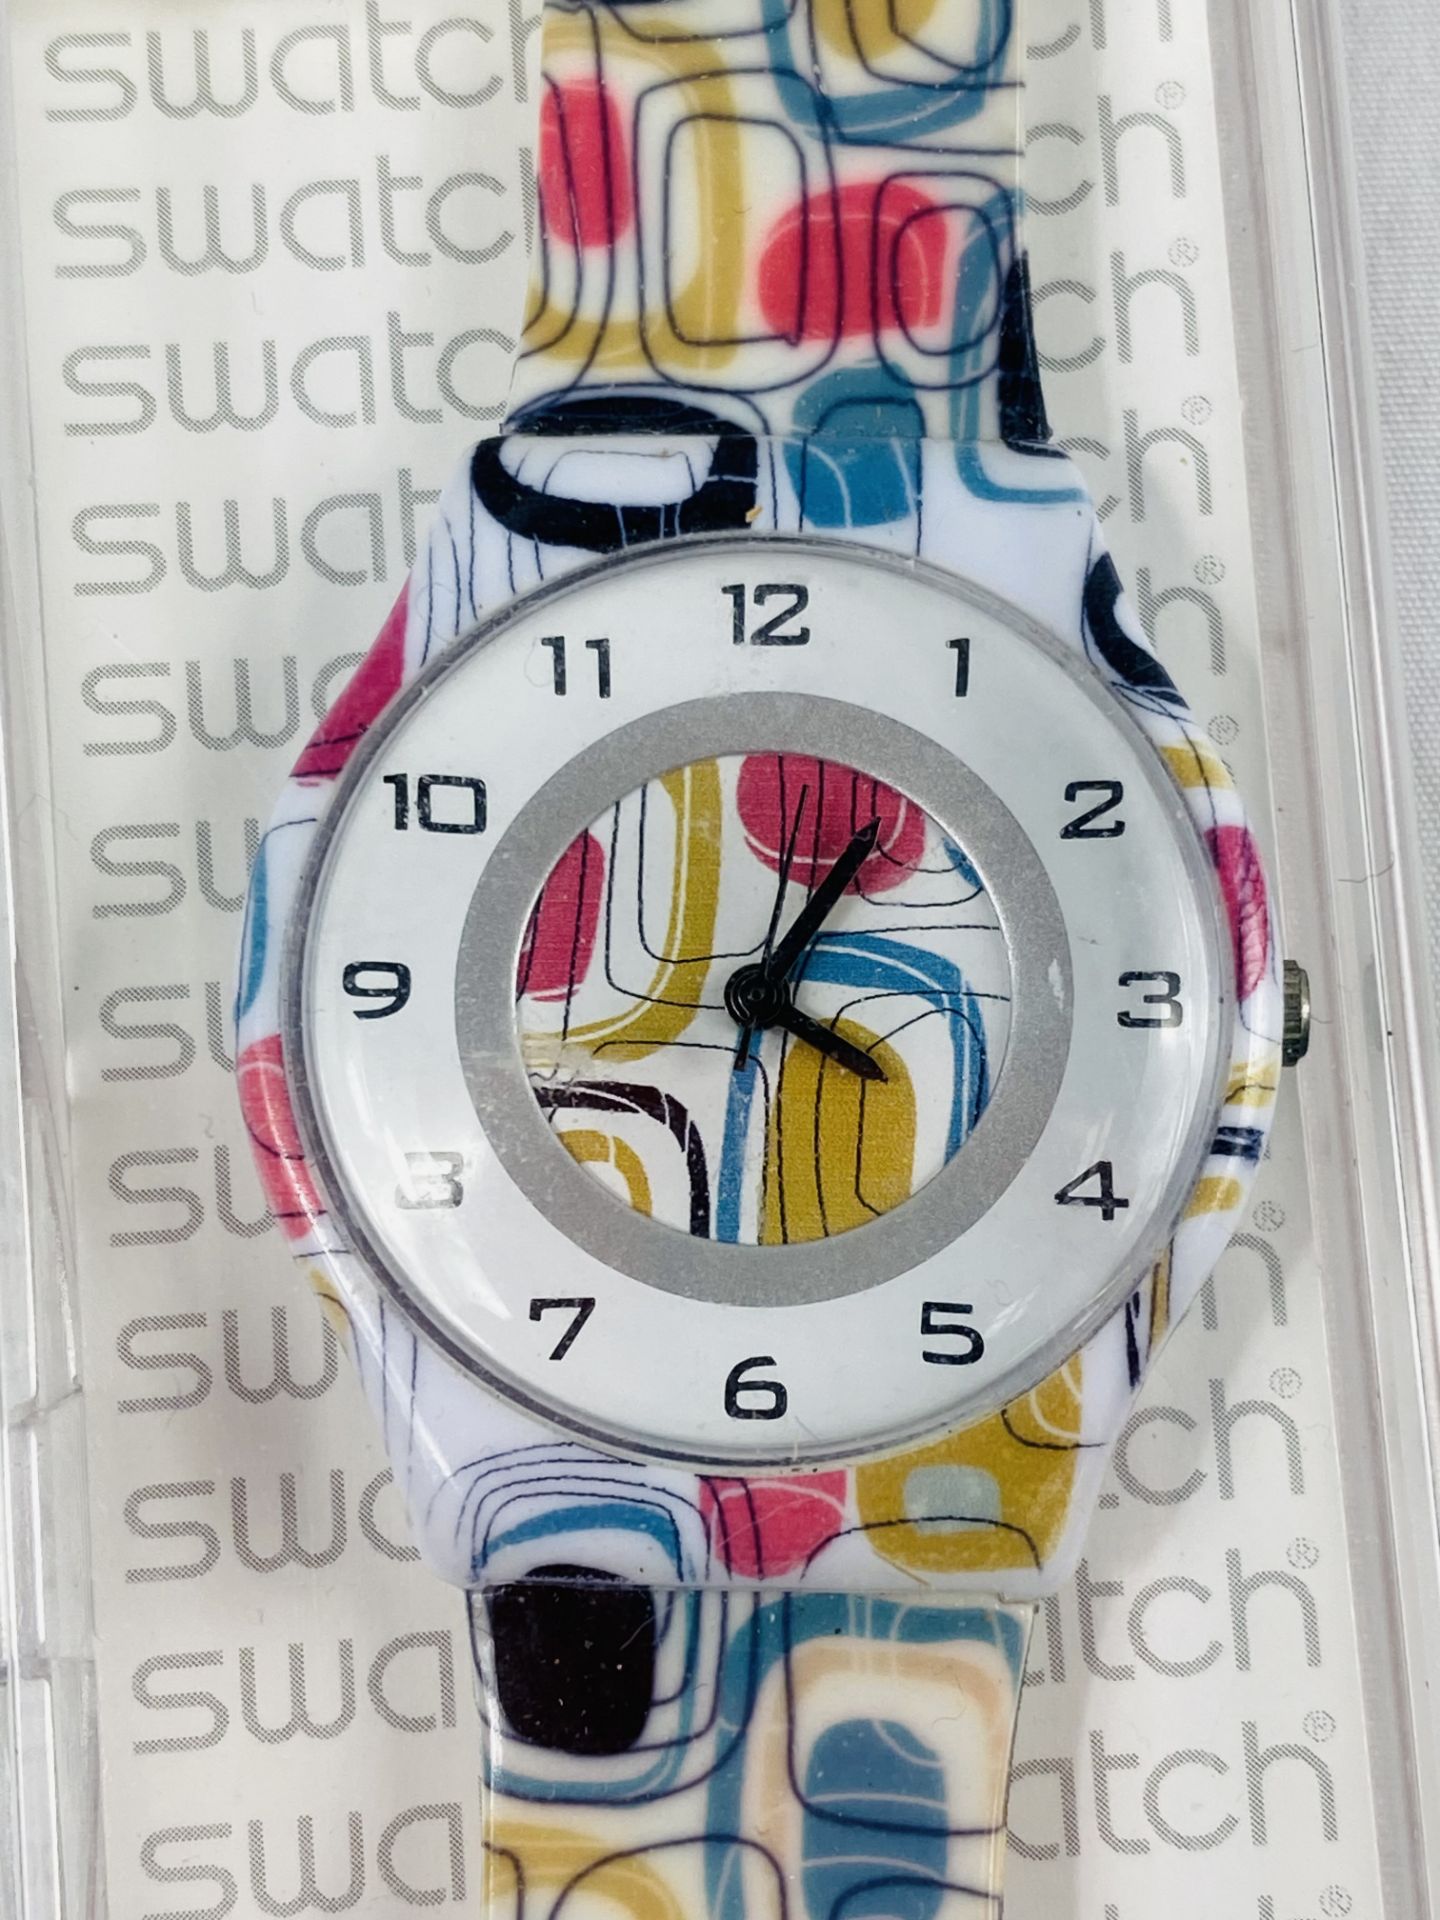 Eleven Swatch watches - Image 10 of 12